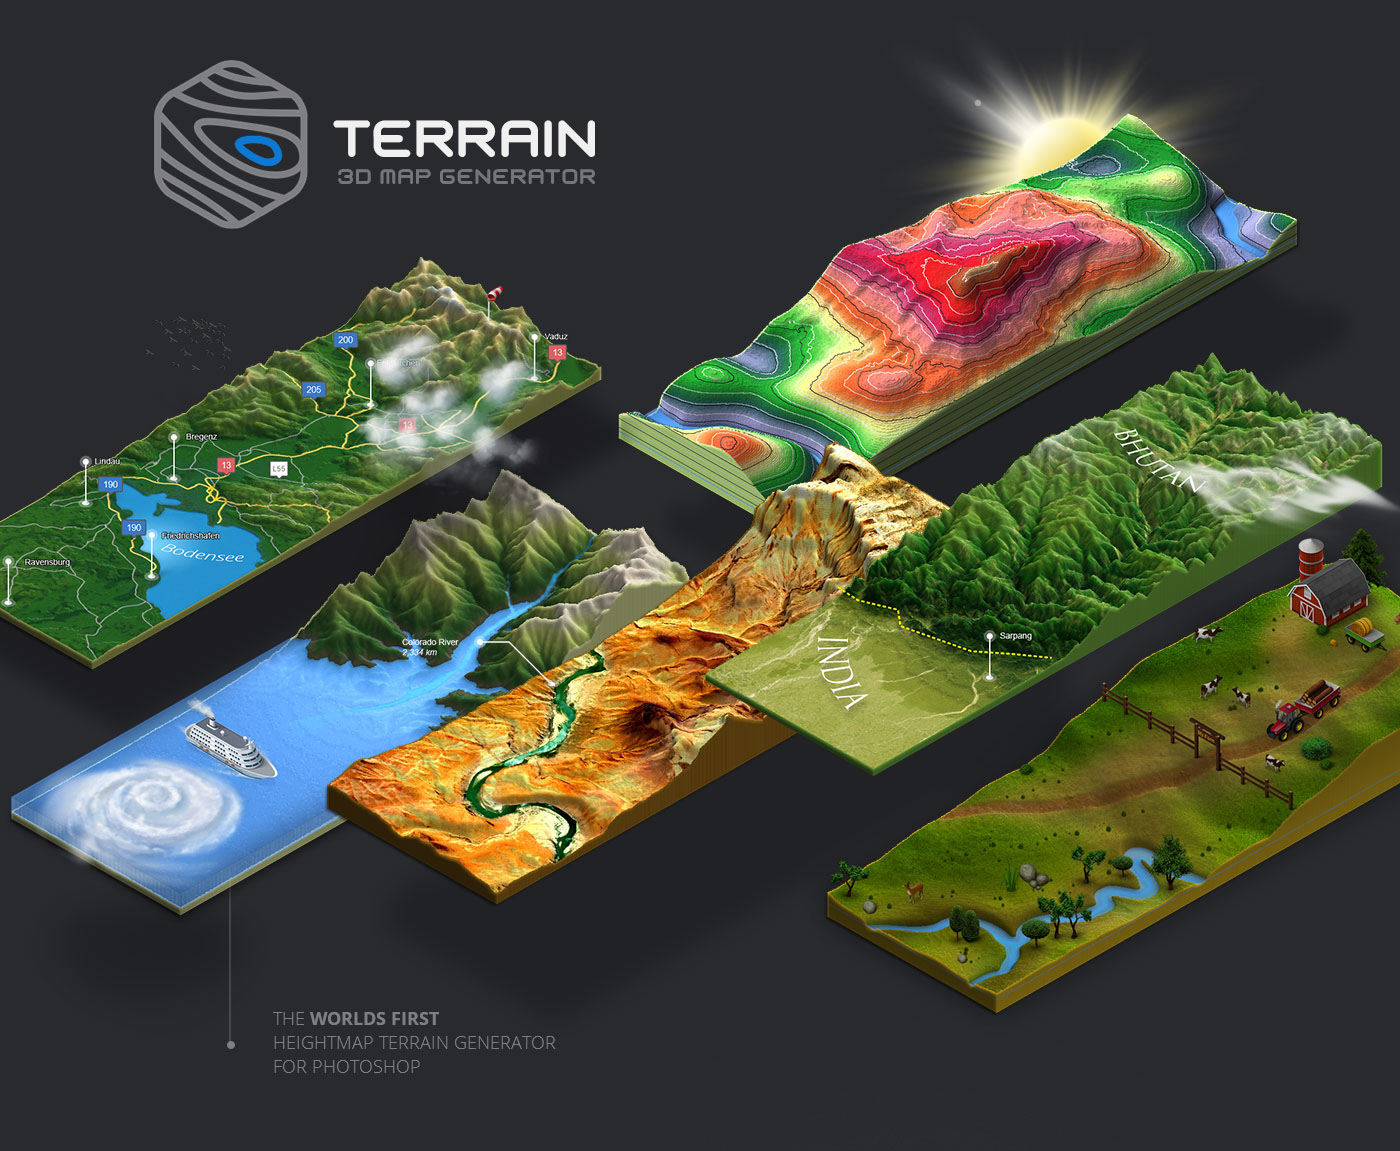 Download 3D Map Generator - Terrain from Heightmap,Draw or modify a heightmap with the heightmap tools,Photoshop CC-2014 or newer